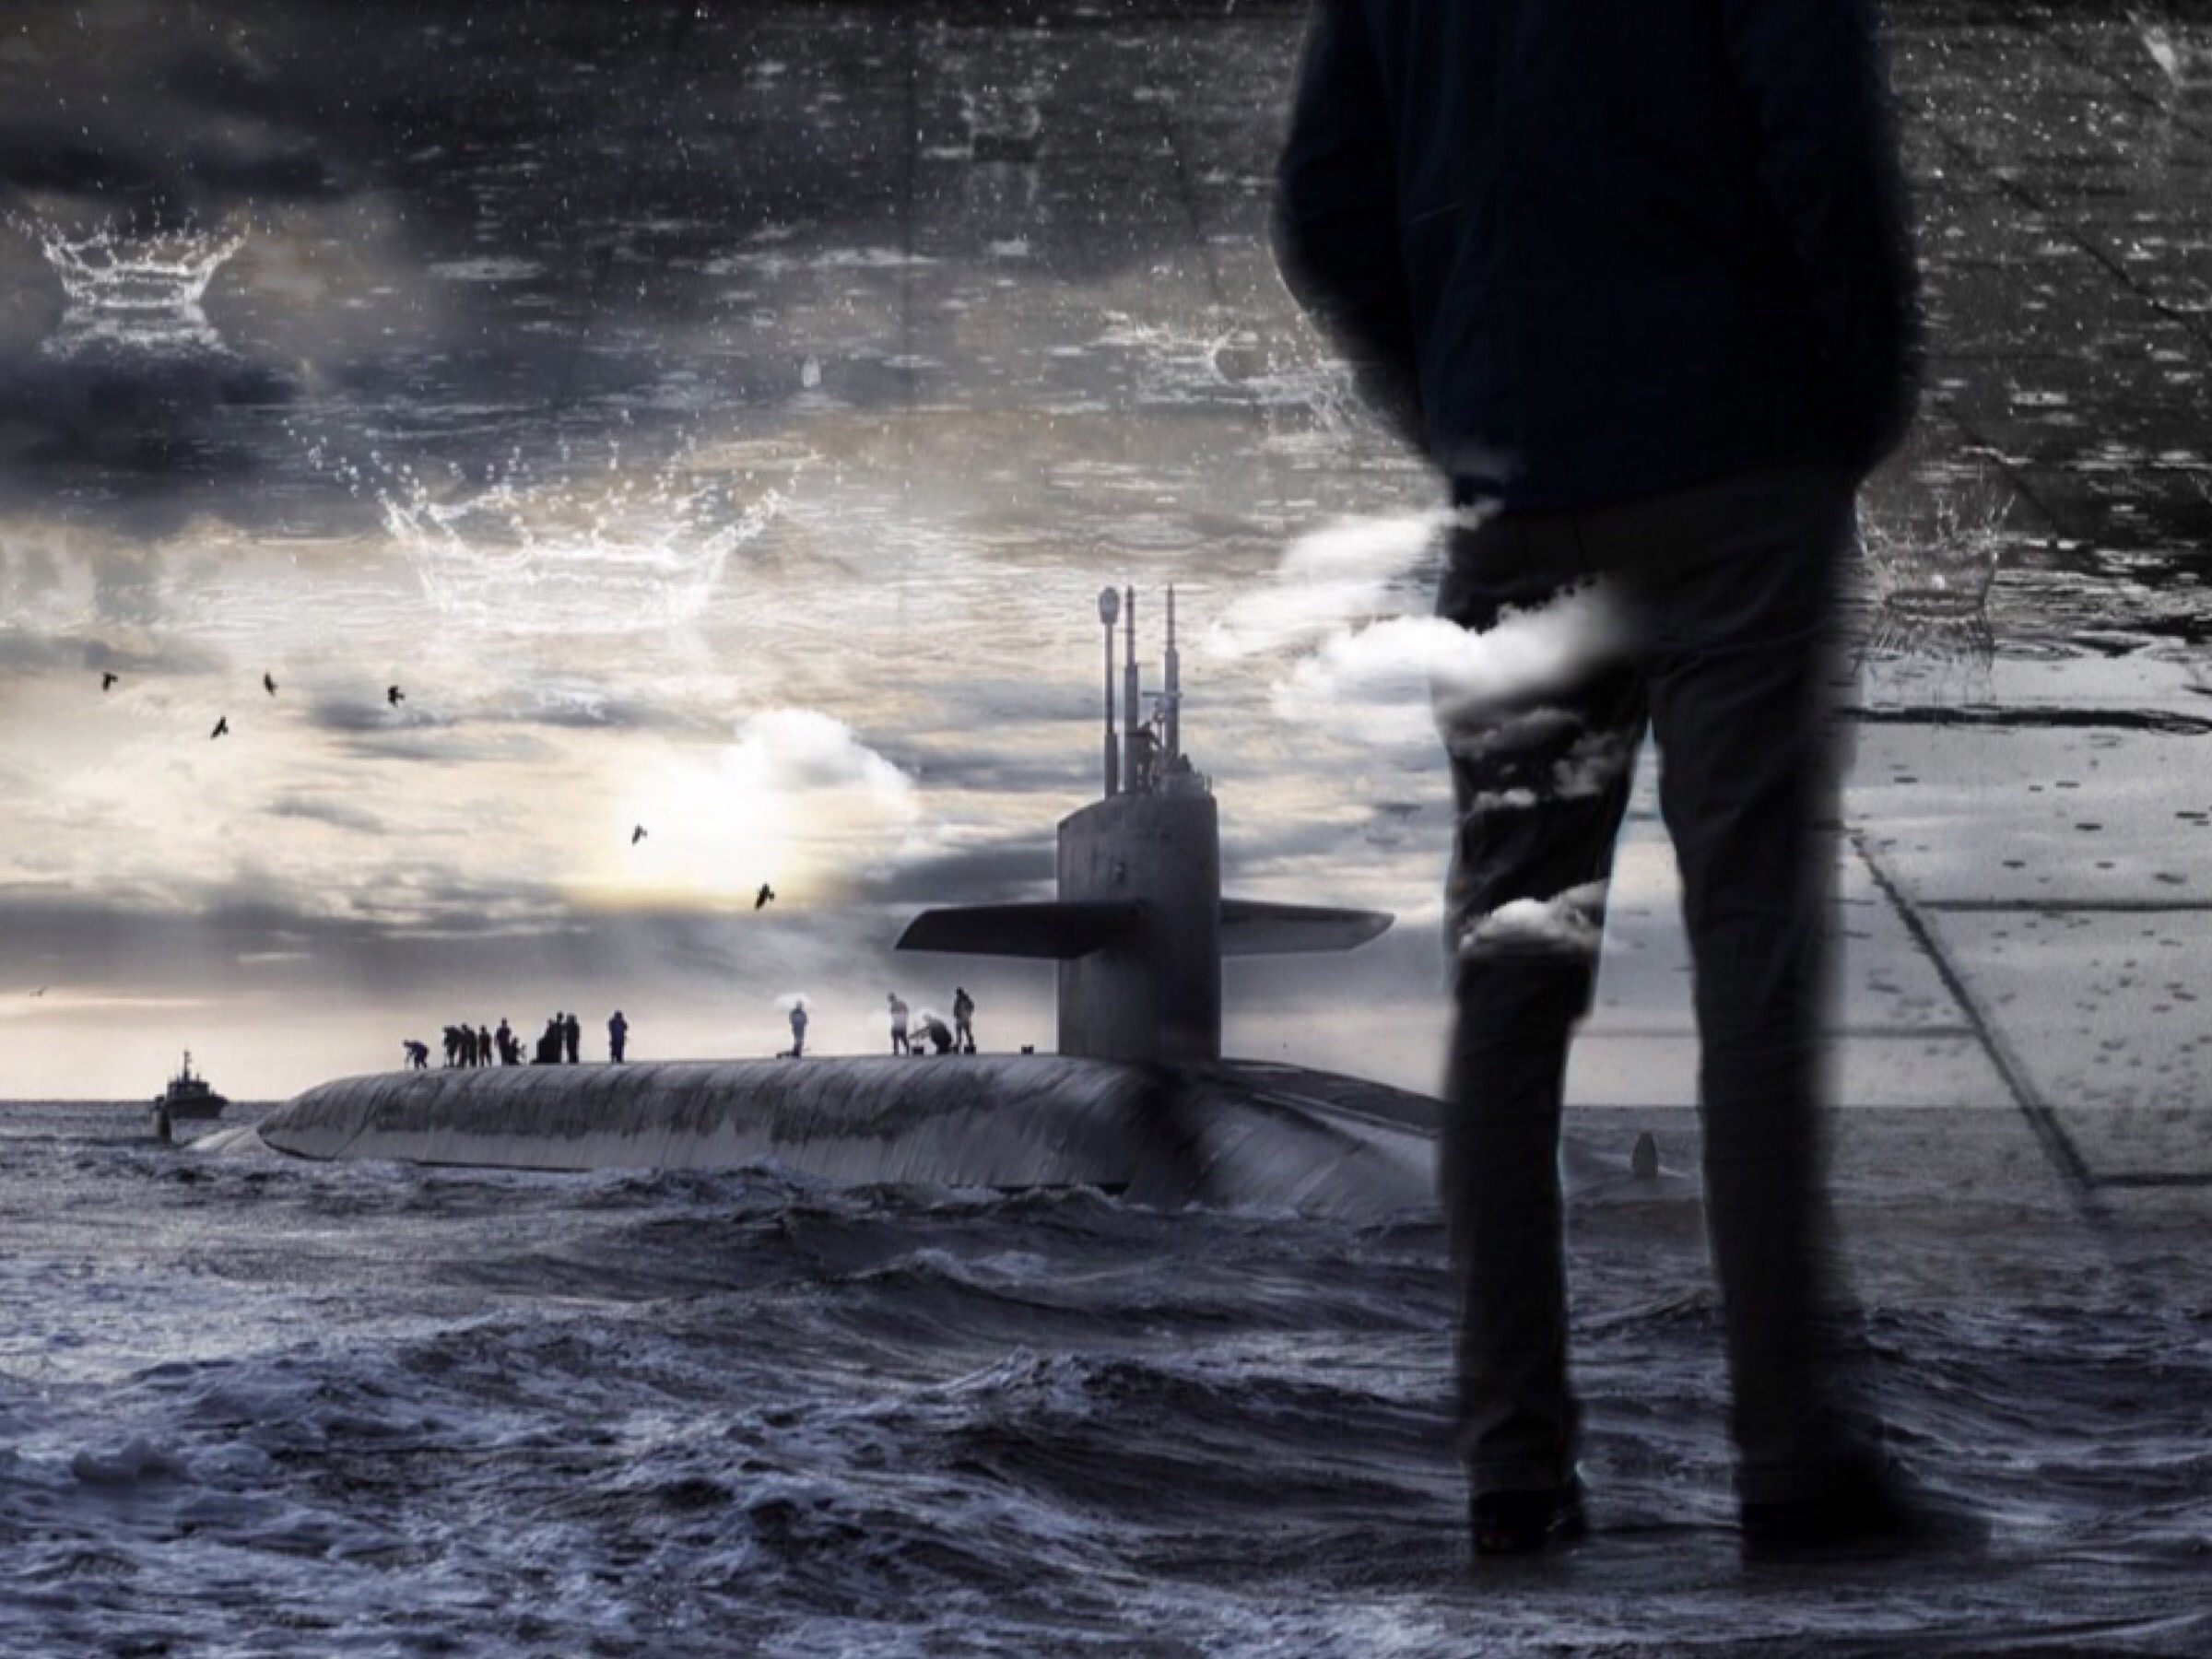 2400x1800 man's silhouette and submarine submerged in water